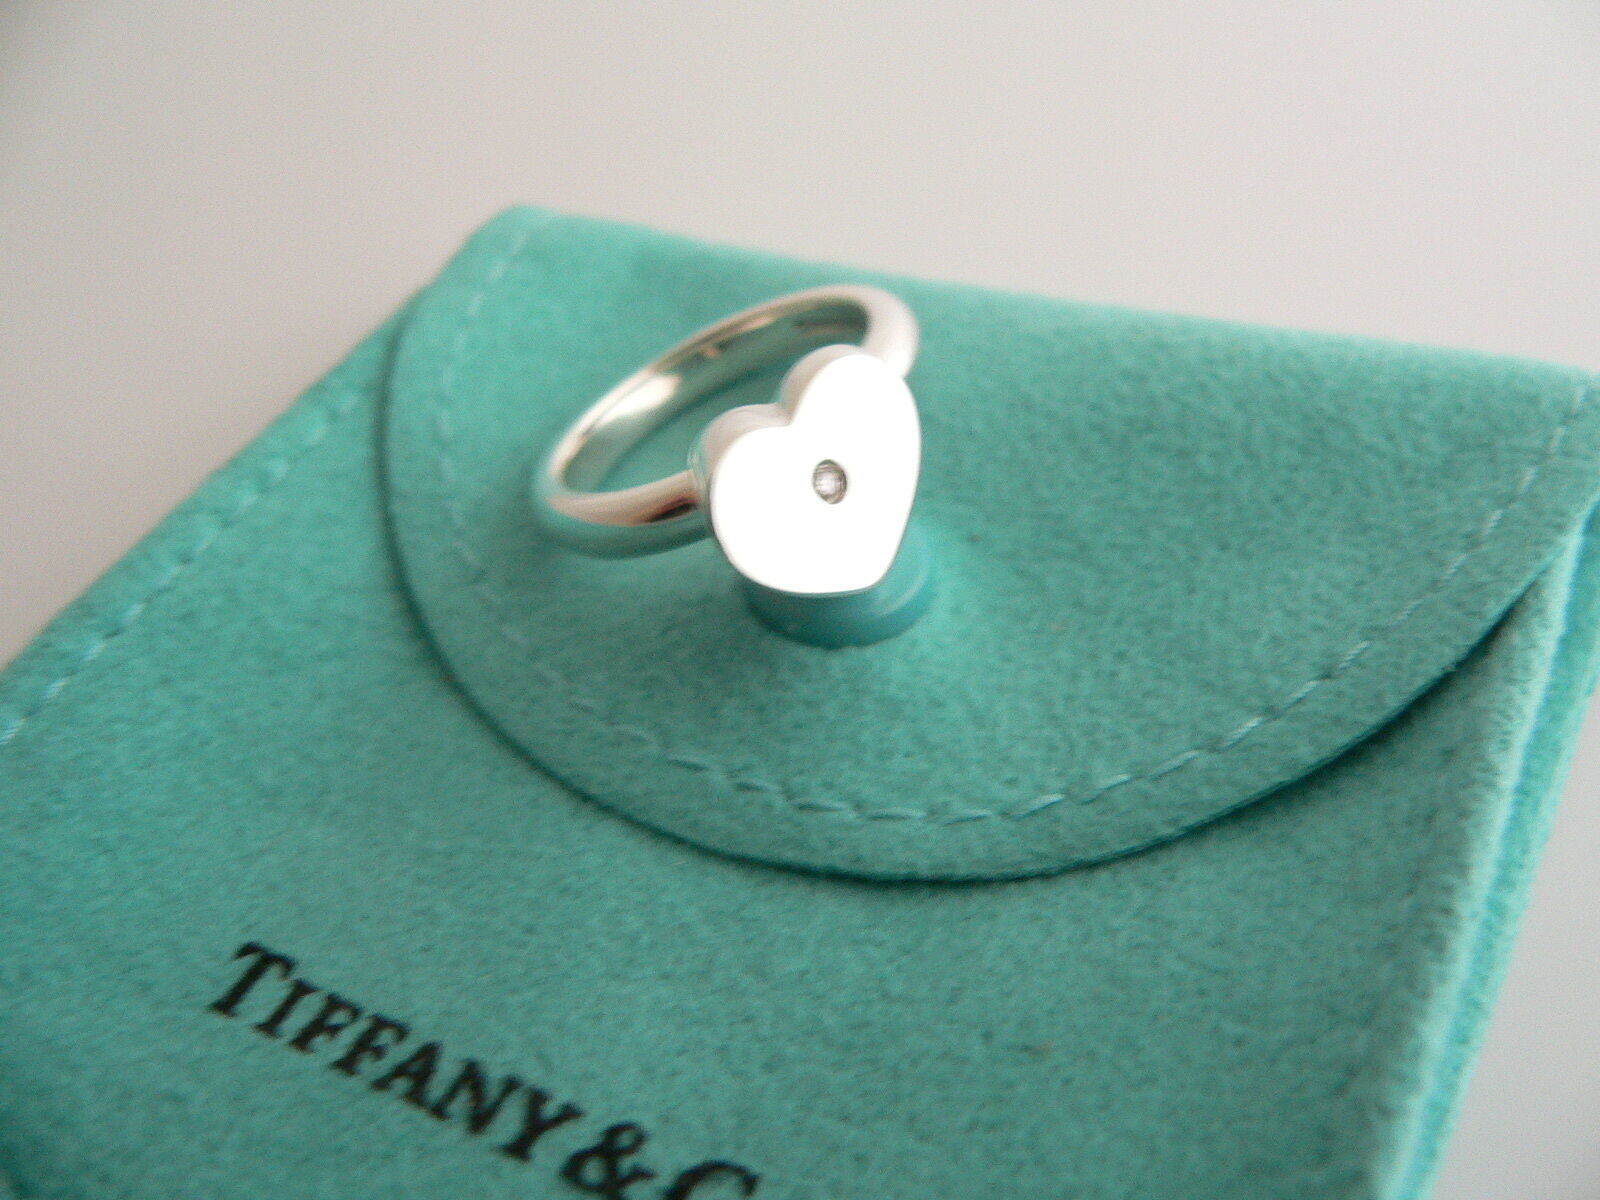 Tiffany & Co Diamond Ring Picasso Heart Promise Love Band Sz 6.5 Gift Pouch Cool - $298.00